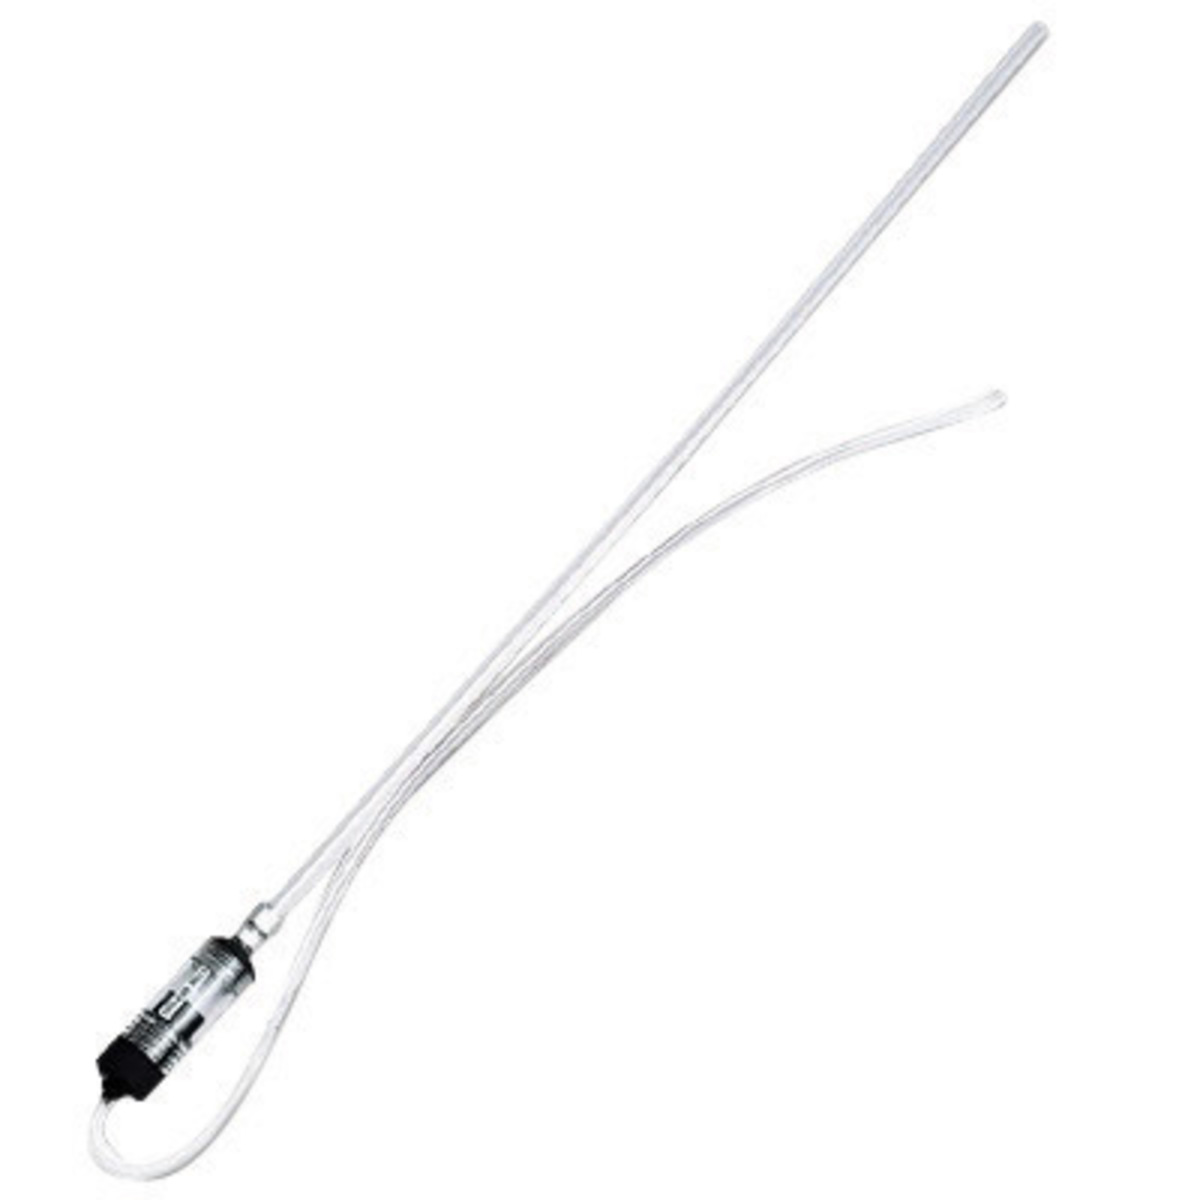 Industrial Scientific 1.5' Stainless Steel Flue Gas Sampling Probe With Filter